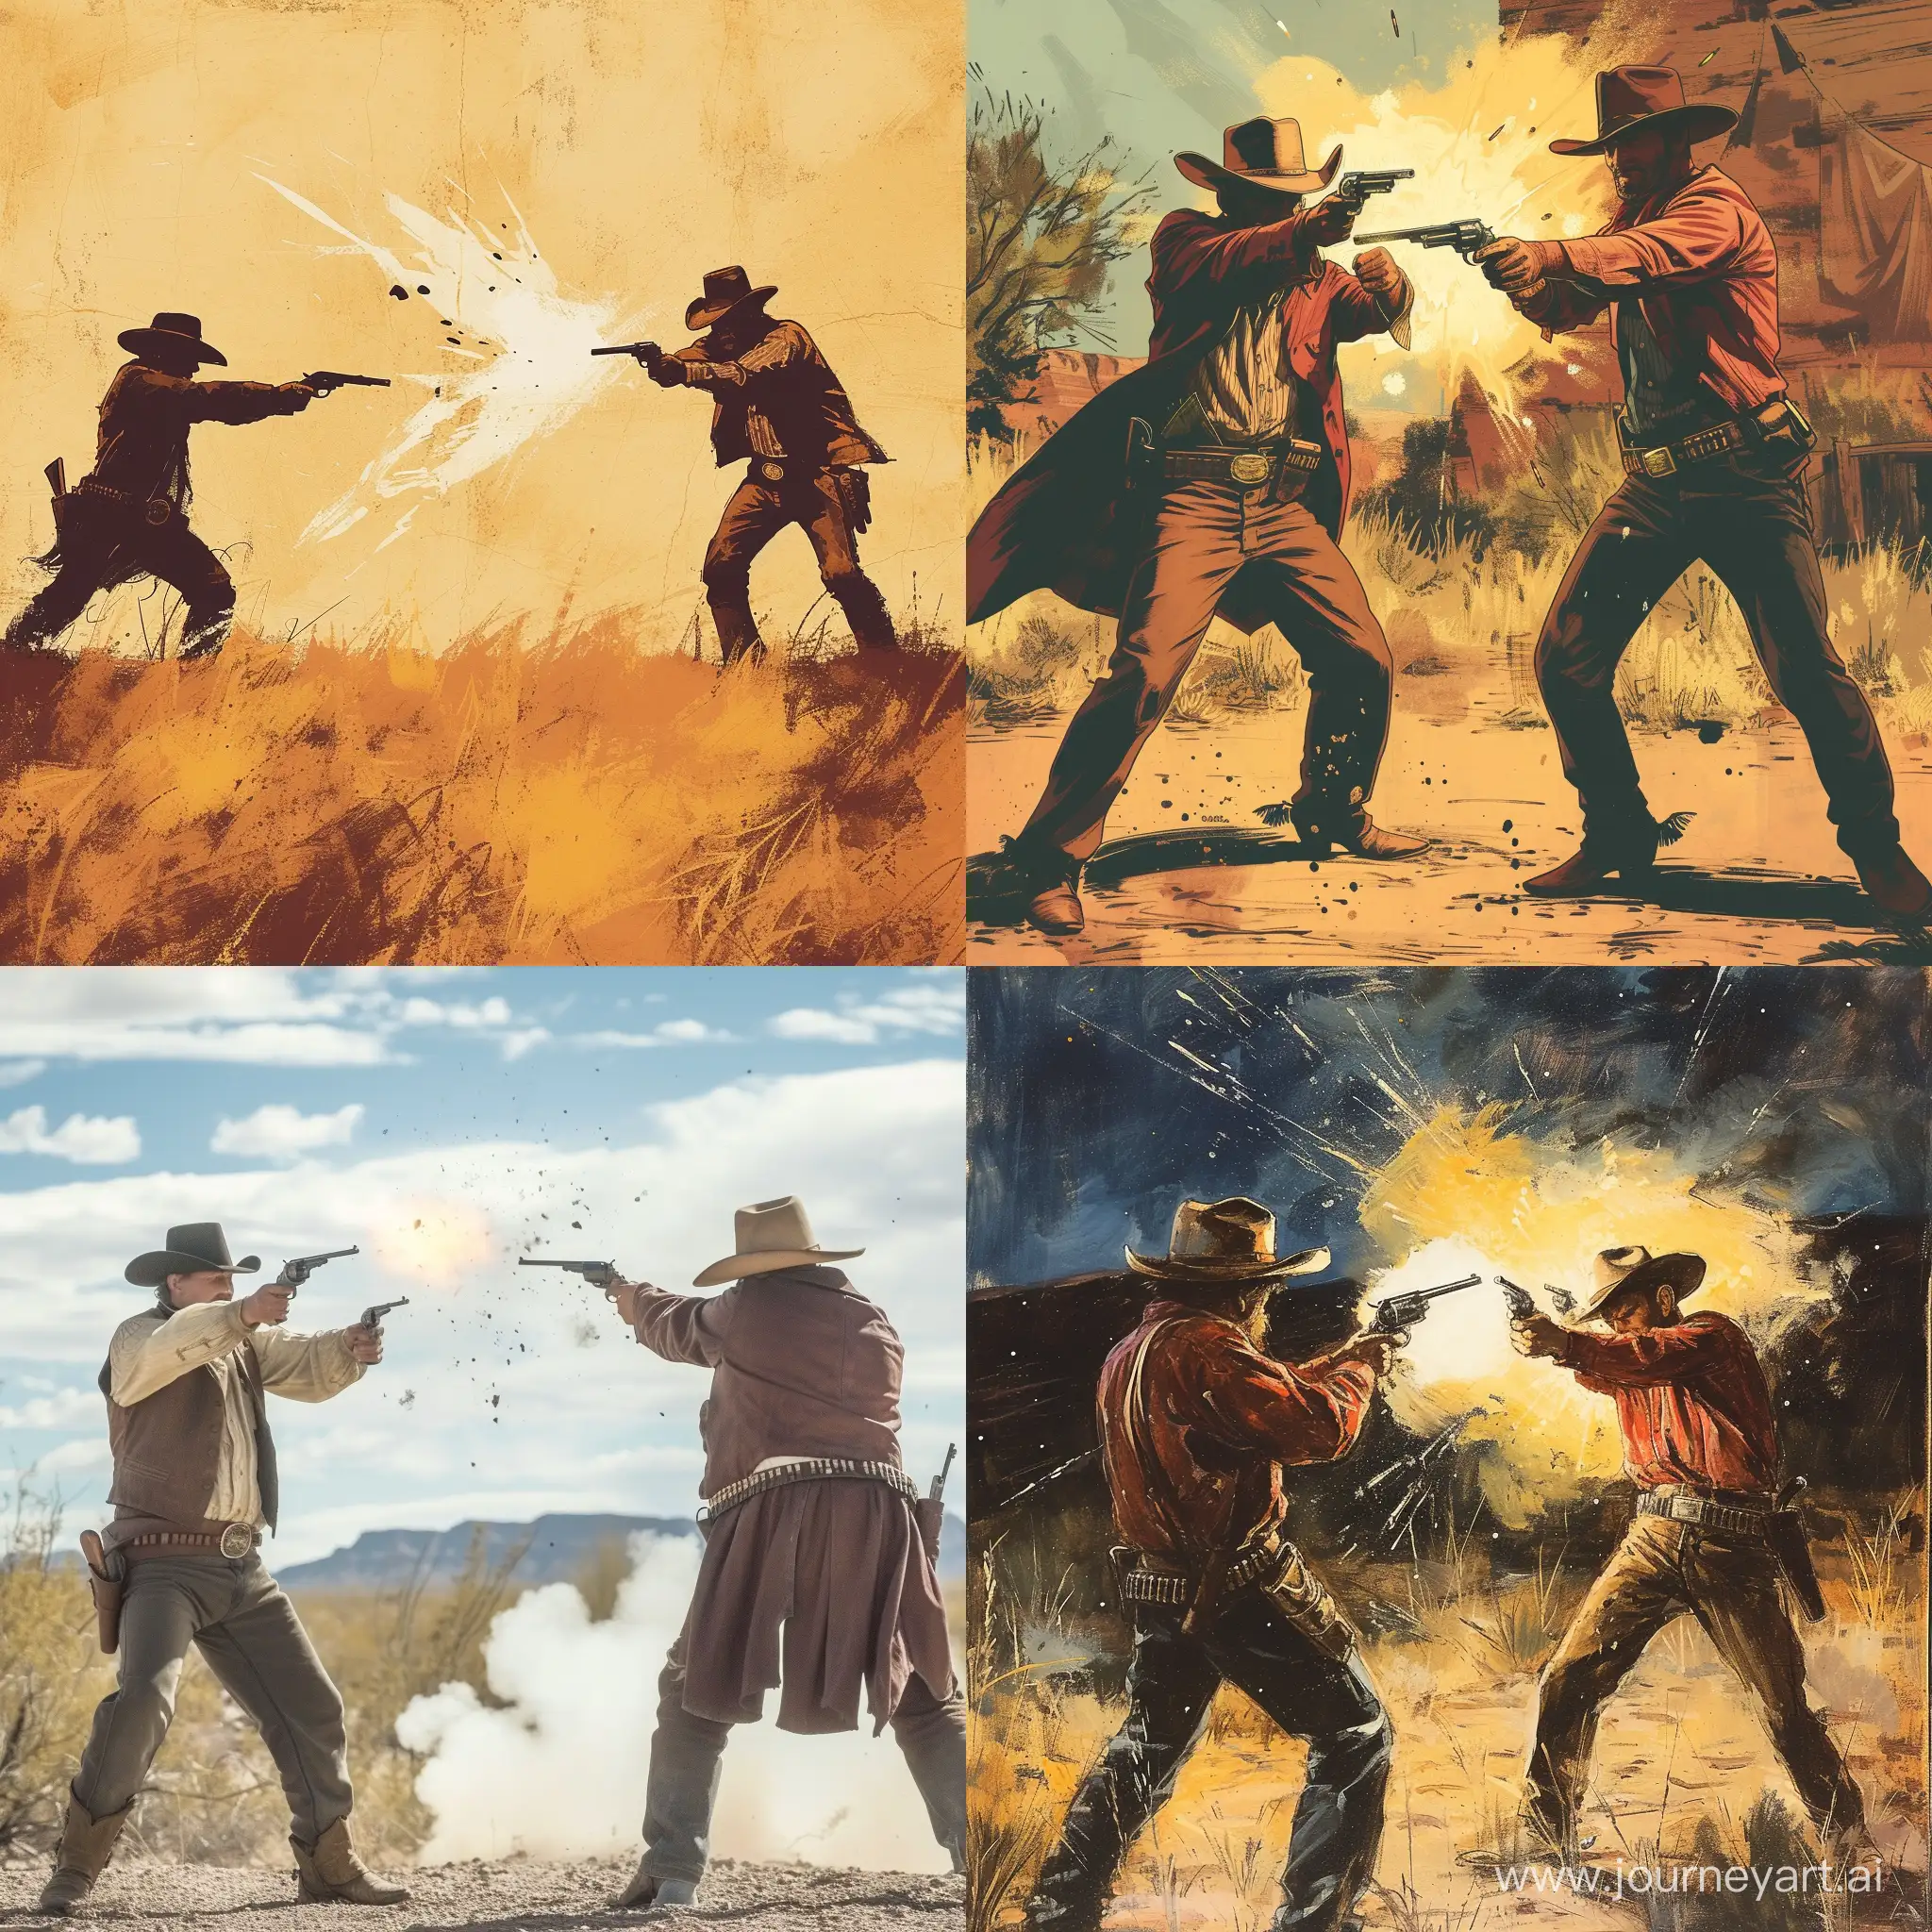 Intense-Wild-West-Shootout-Between-Two-Cowboys